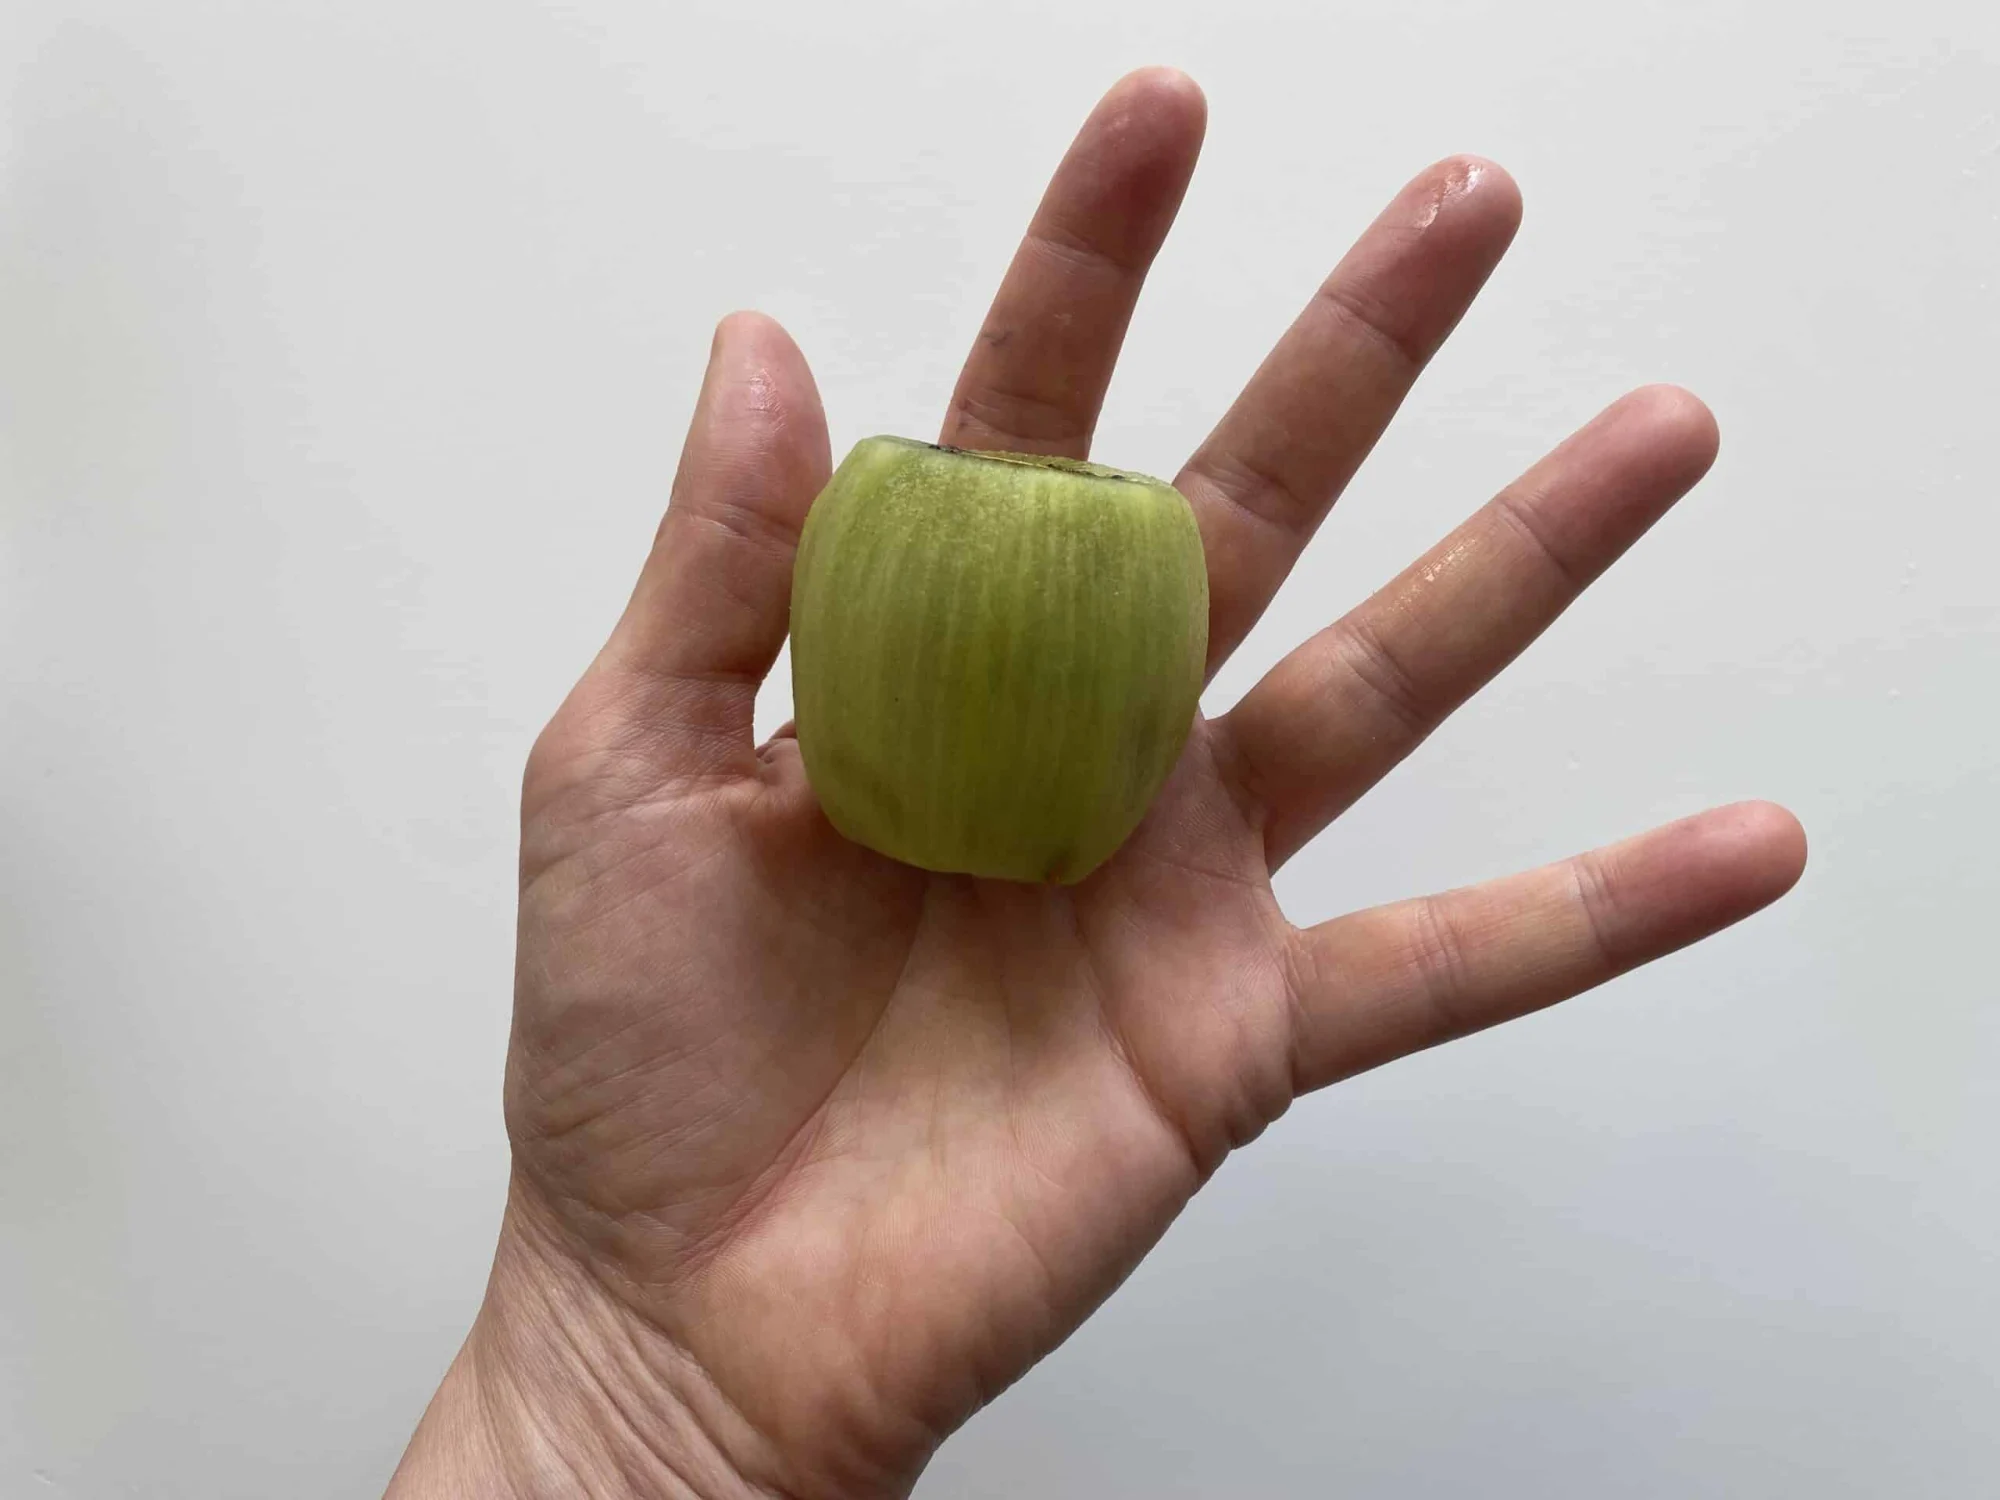 a hand holding a whole, peeled kiwi in the palm for babies starting solids